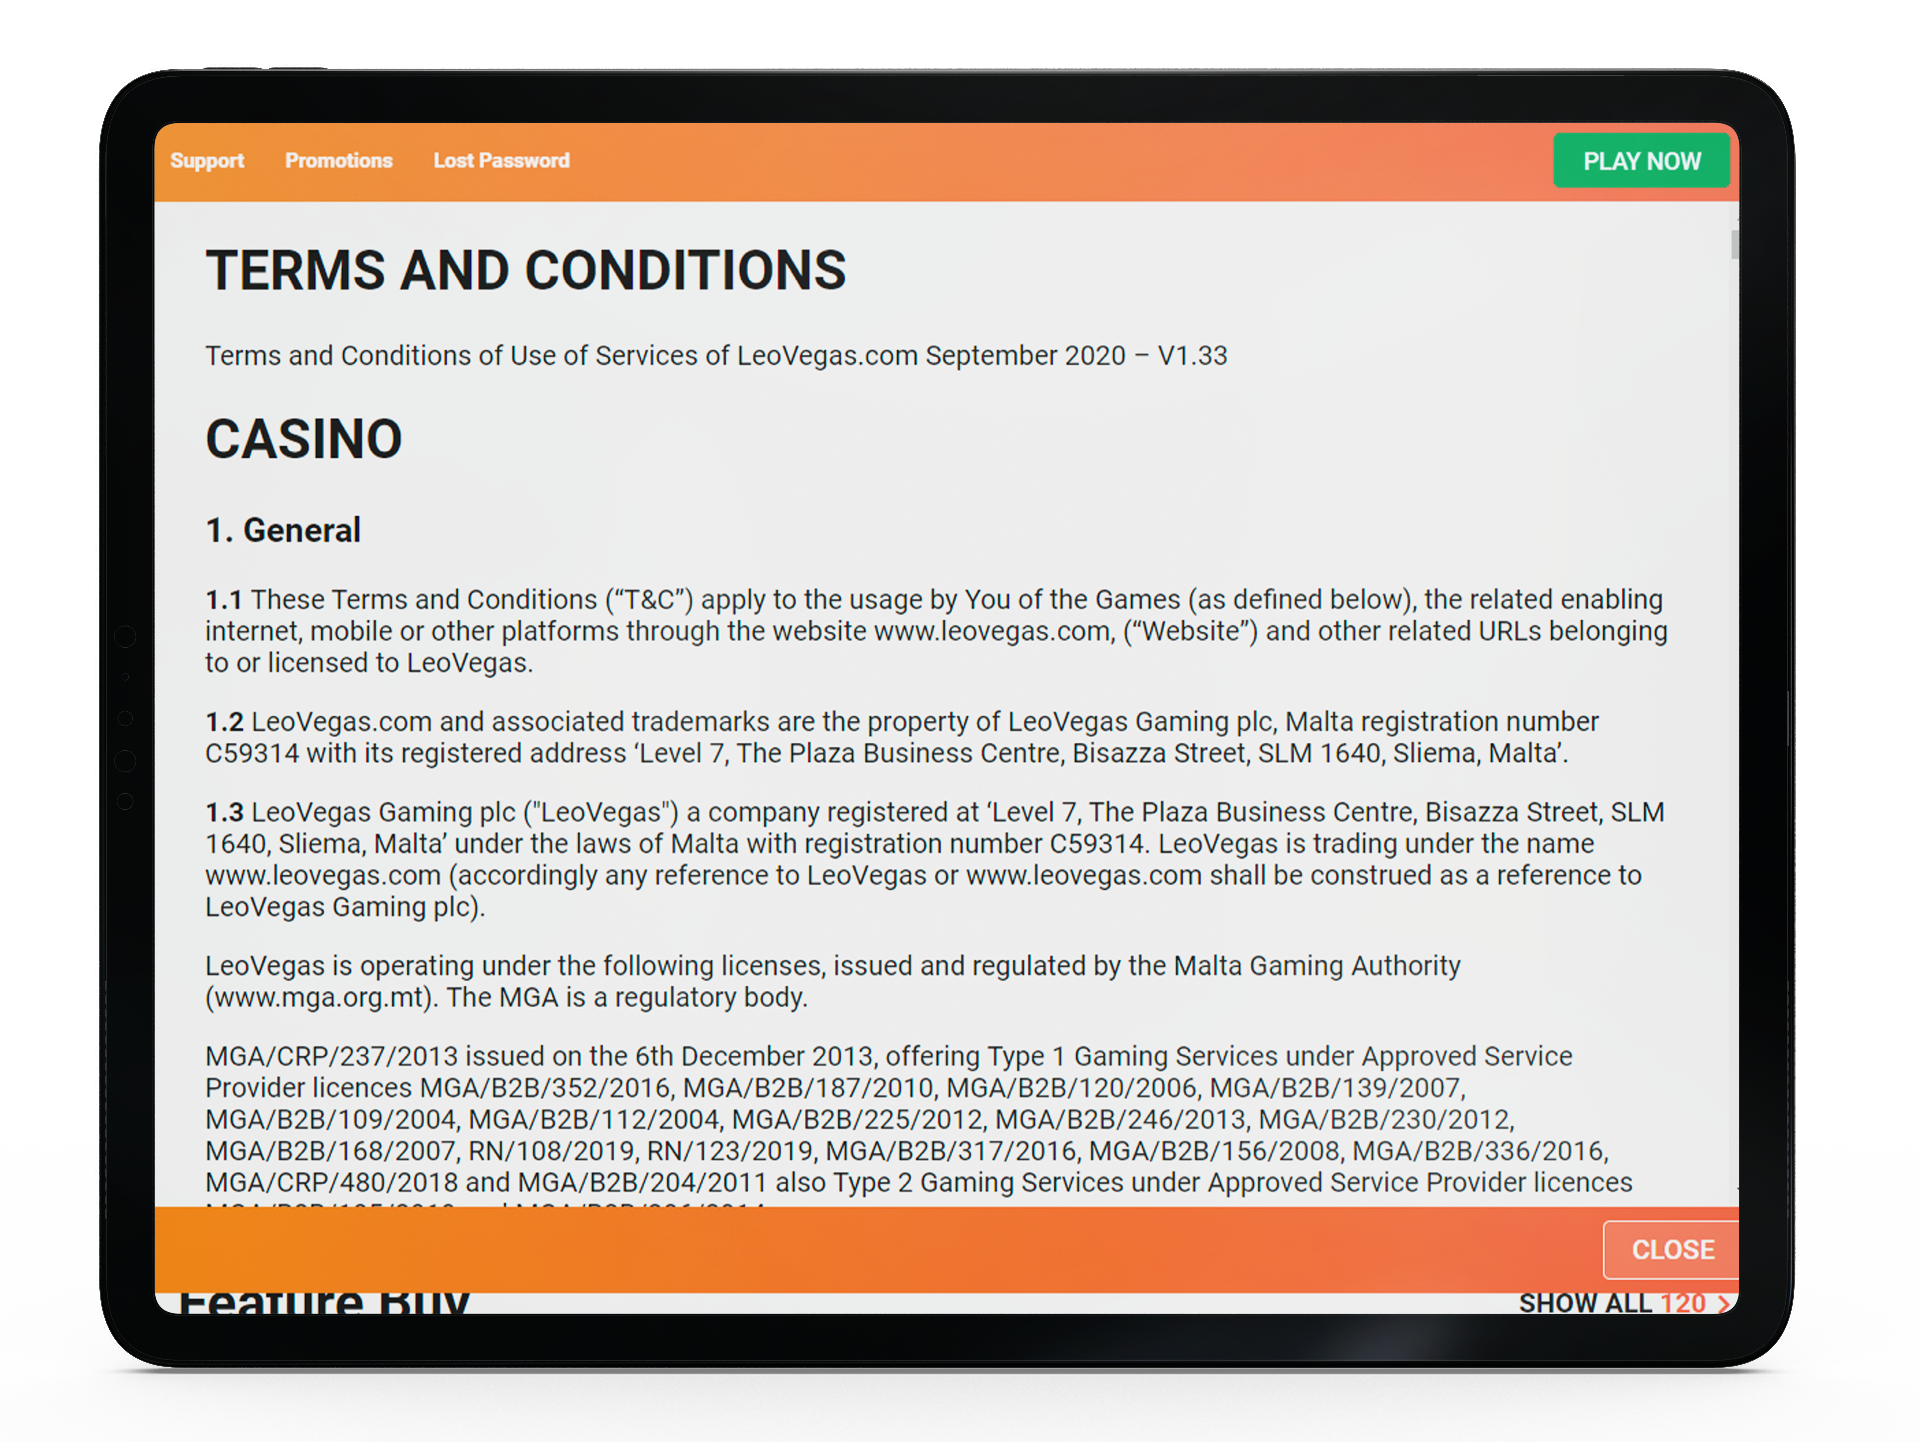 Study all the terms and wagering conditions before receiving the bonus.